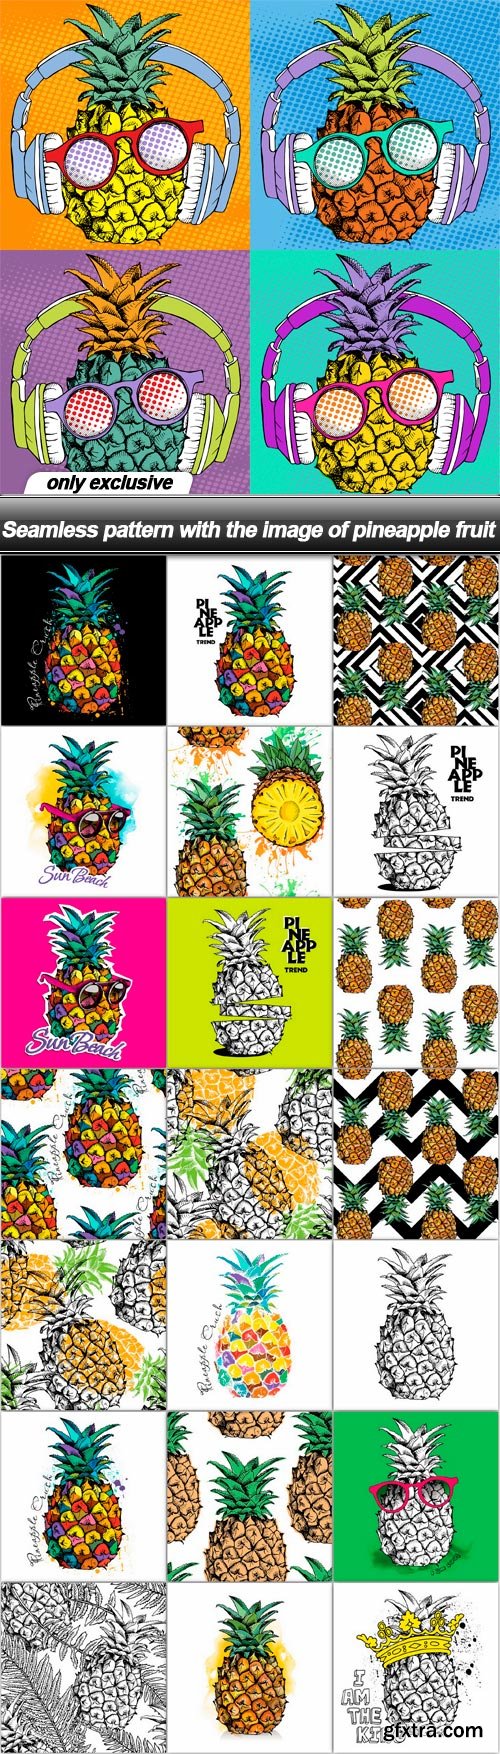 Seamless pattern with the image of pineapple fruit - 38 EPS